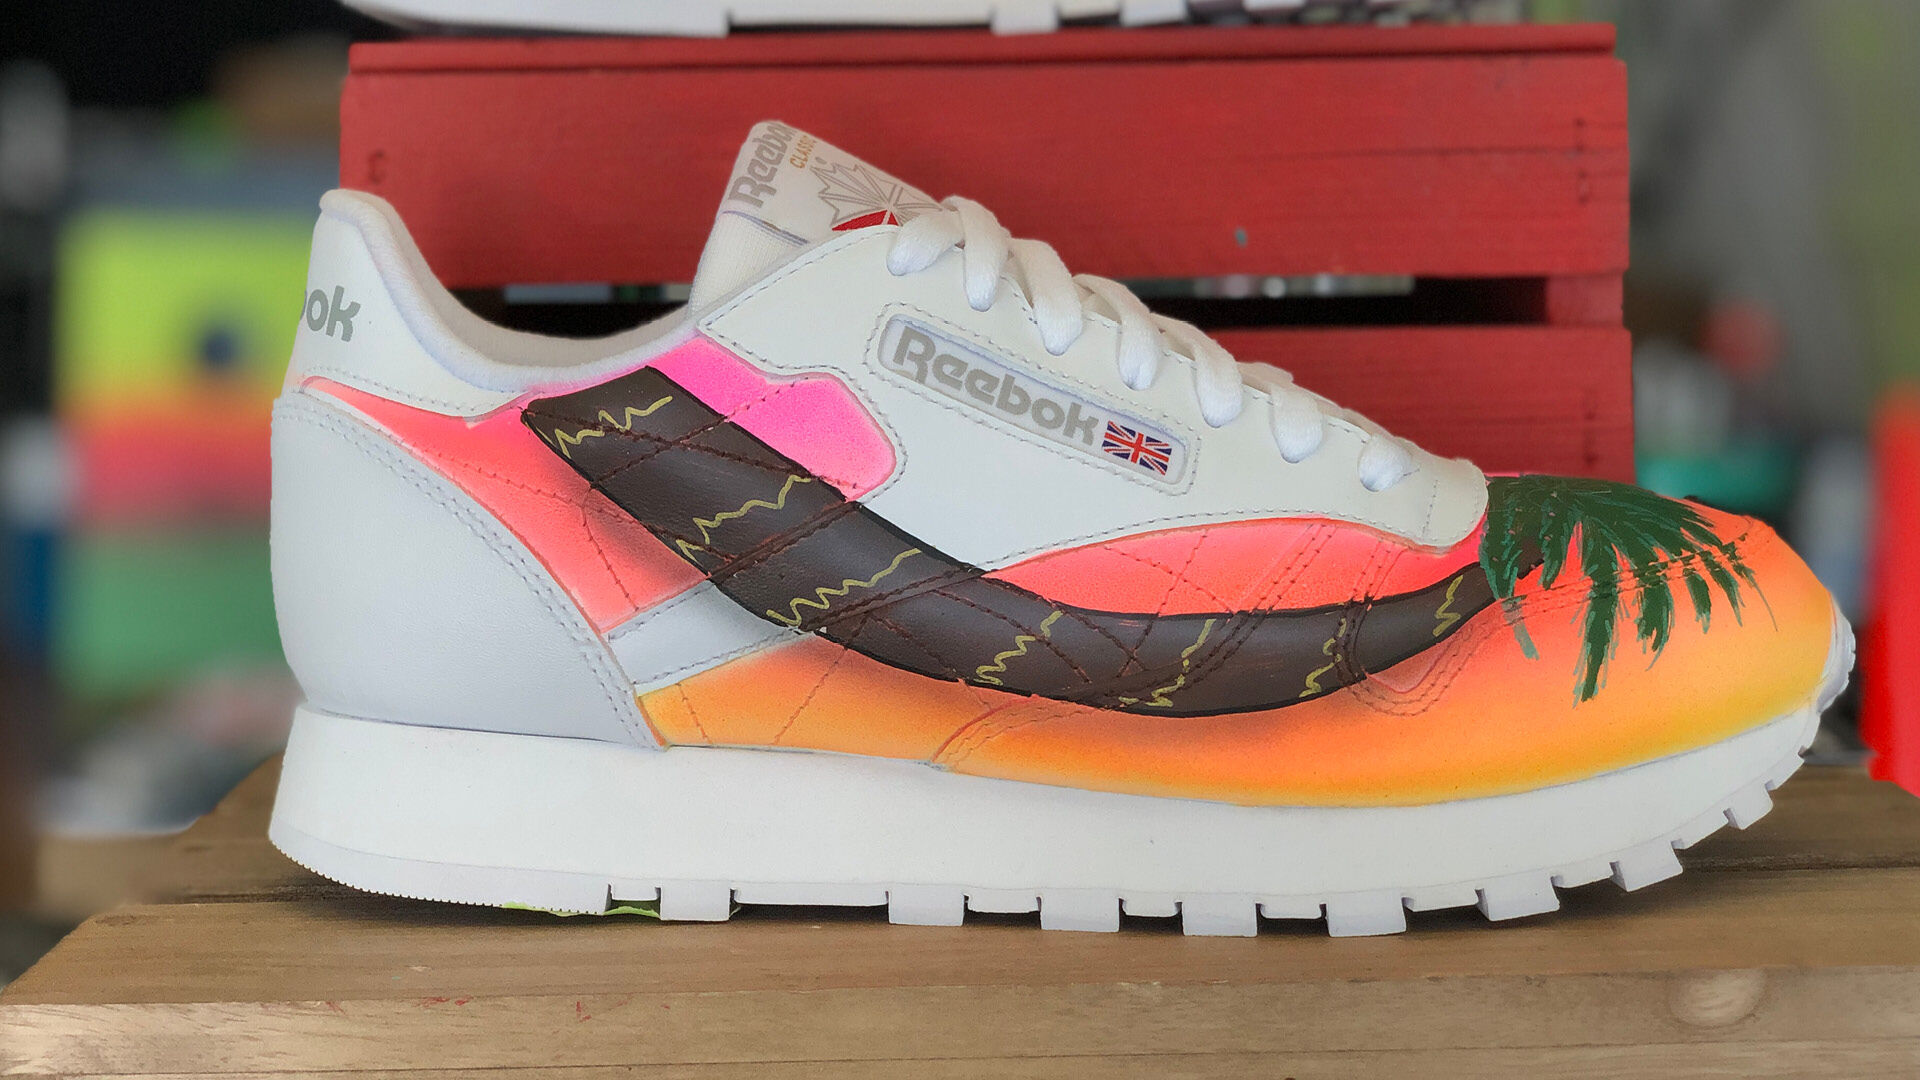 You Can Now Your Reeboks Personalised In Dubai By A Picasso | Harper's Bazaar Arabia